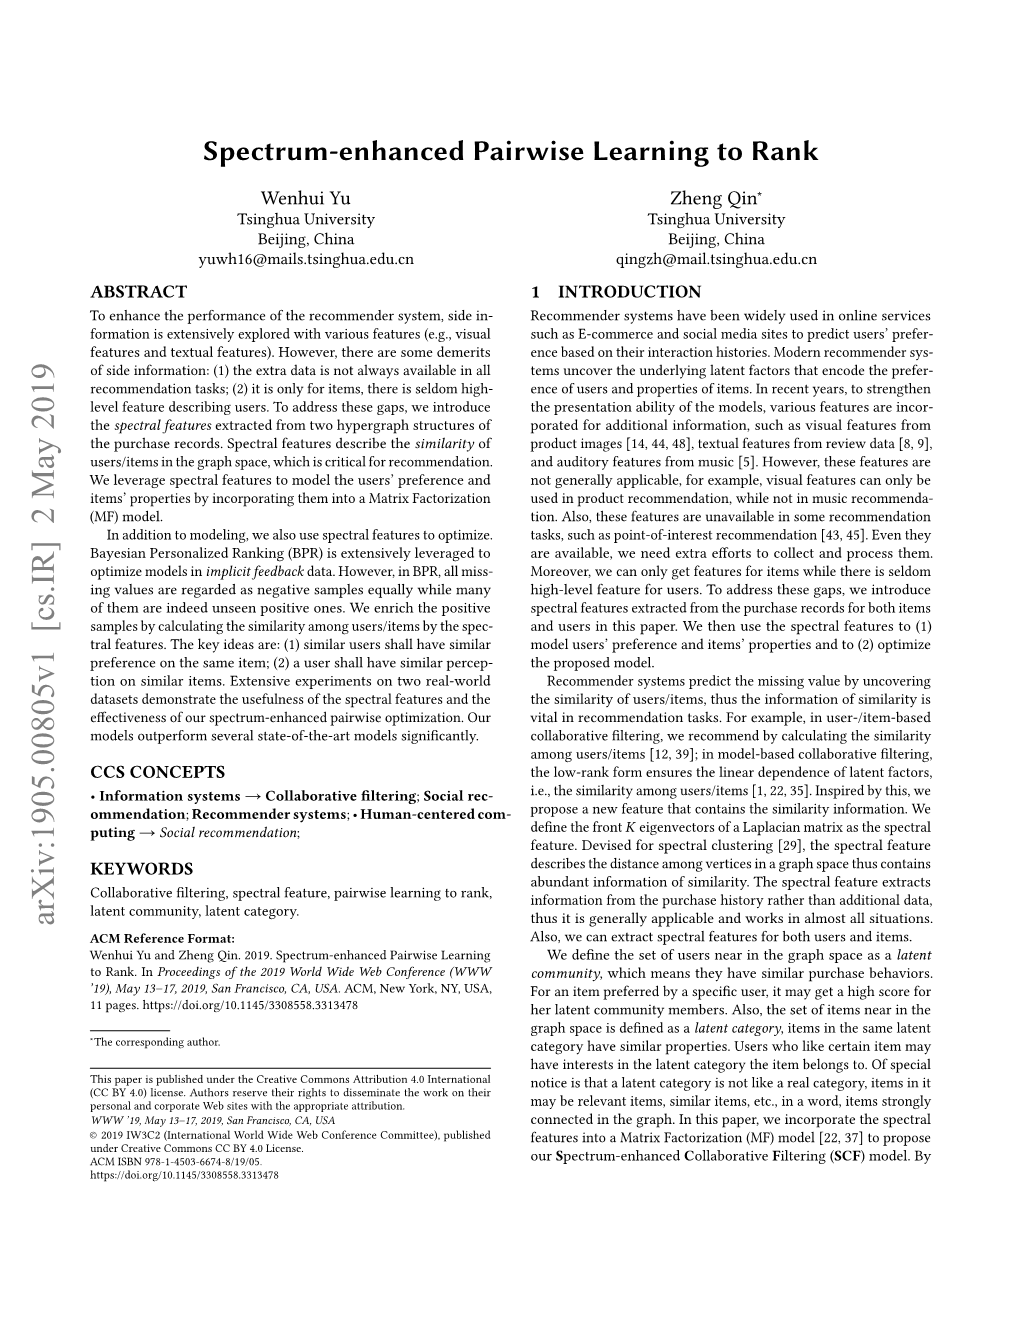 Spectrum-Enhanced Pairwise Learning to Rank